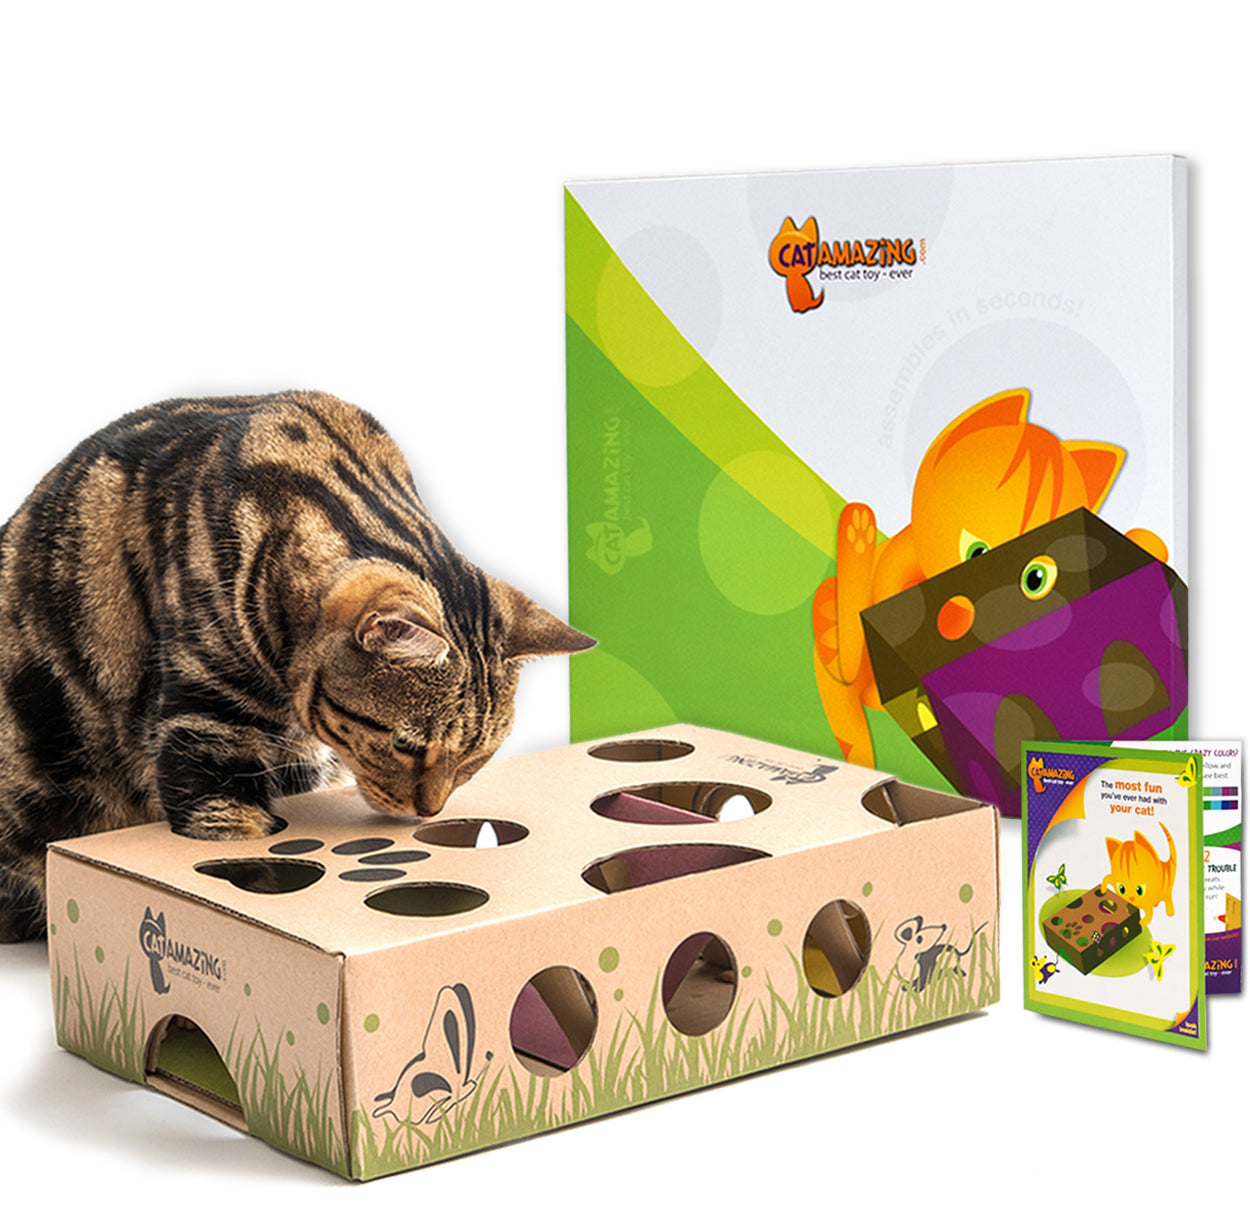 Cat Amazing Classic Interactive Cat Toy Treat Hunt puzzle feeder box for cats